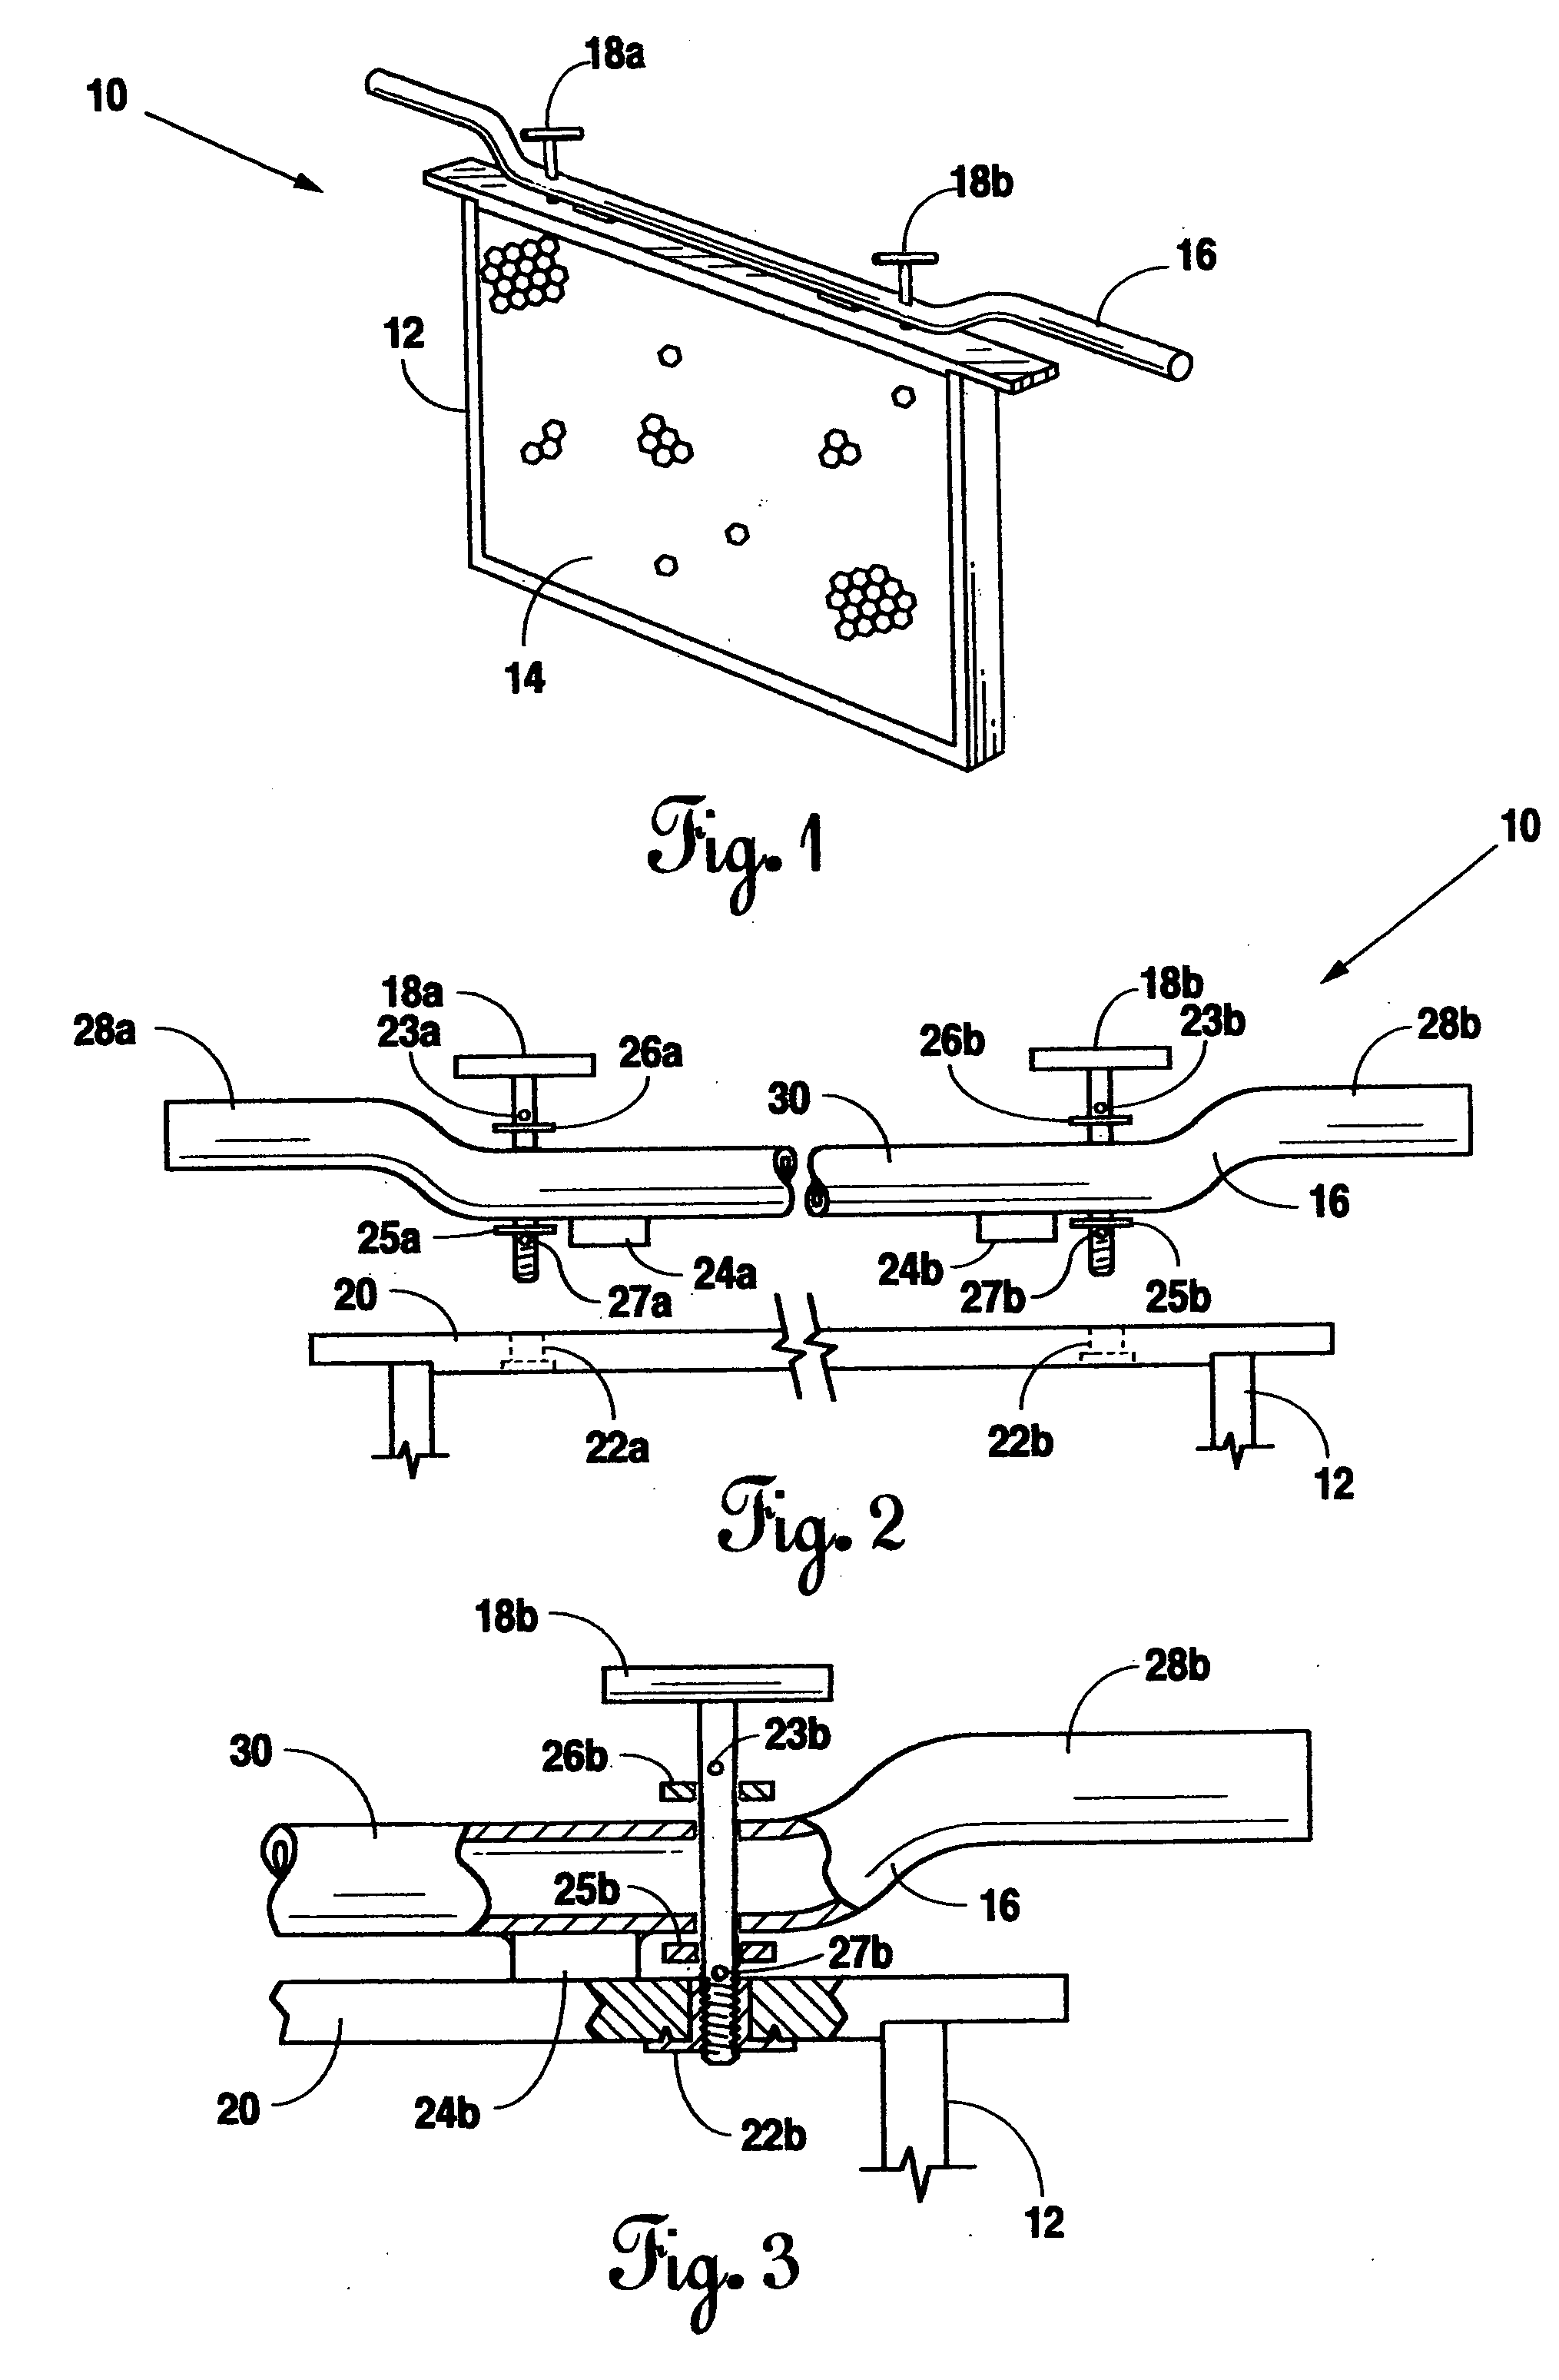 Method and apparatus for the removal and handling of honey frames from beehive boxes